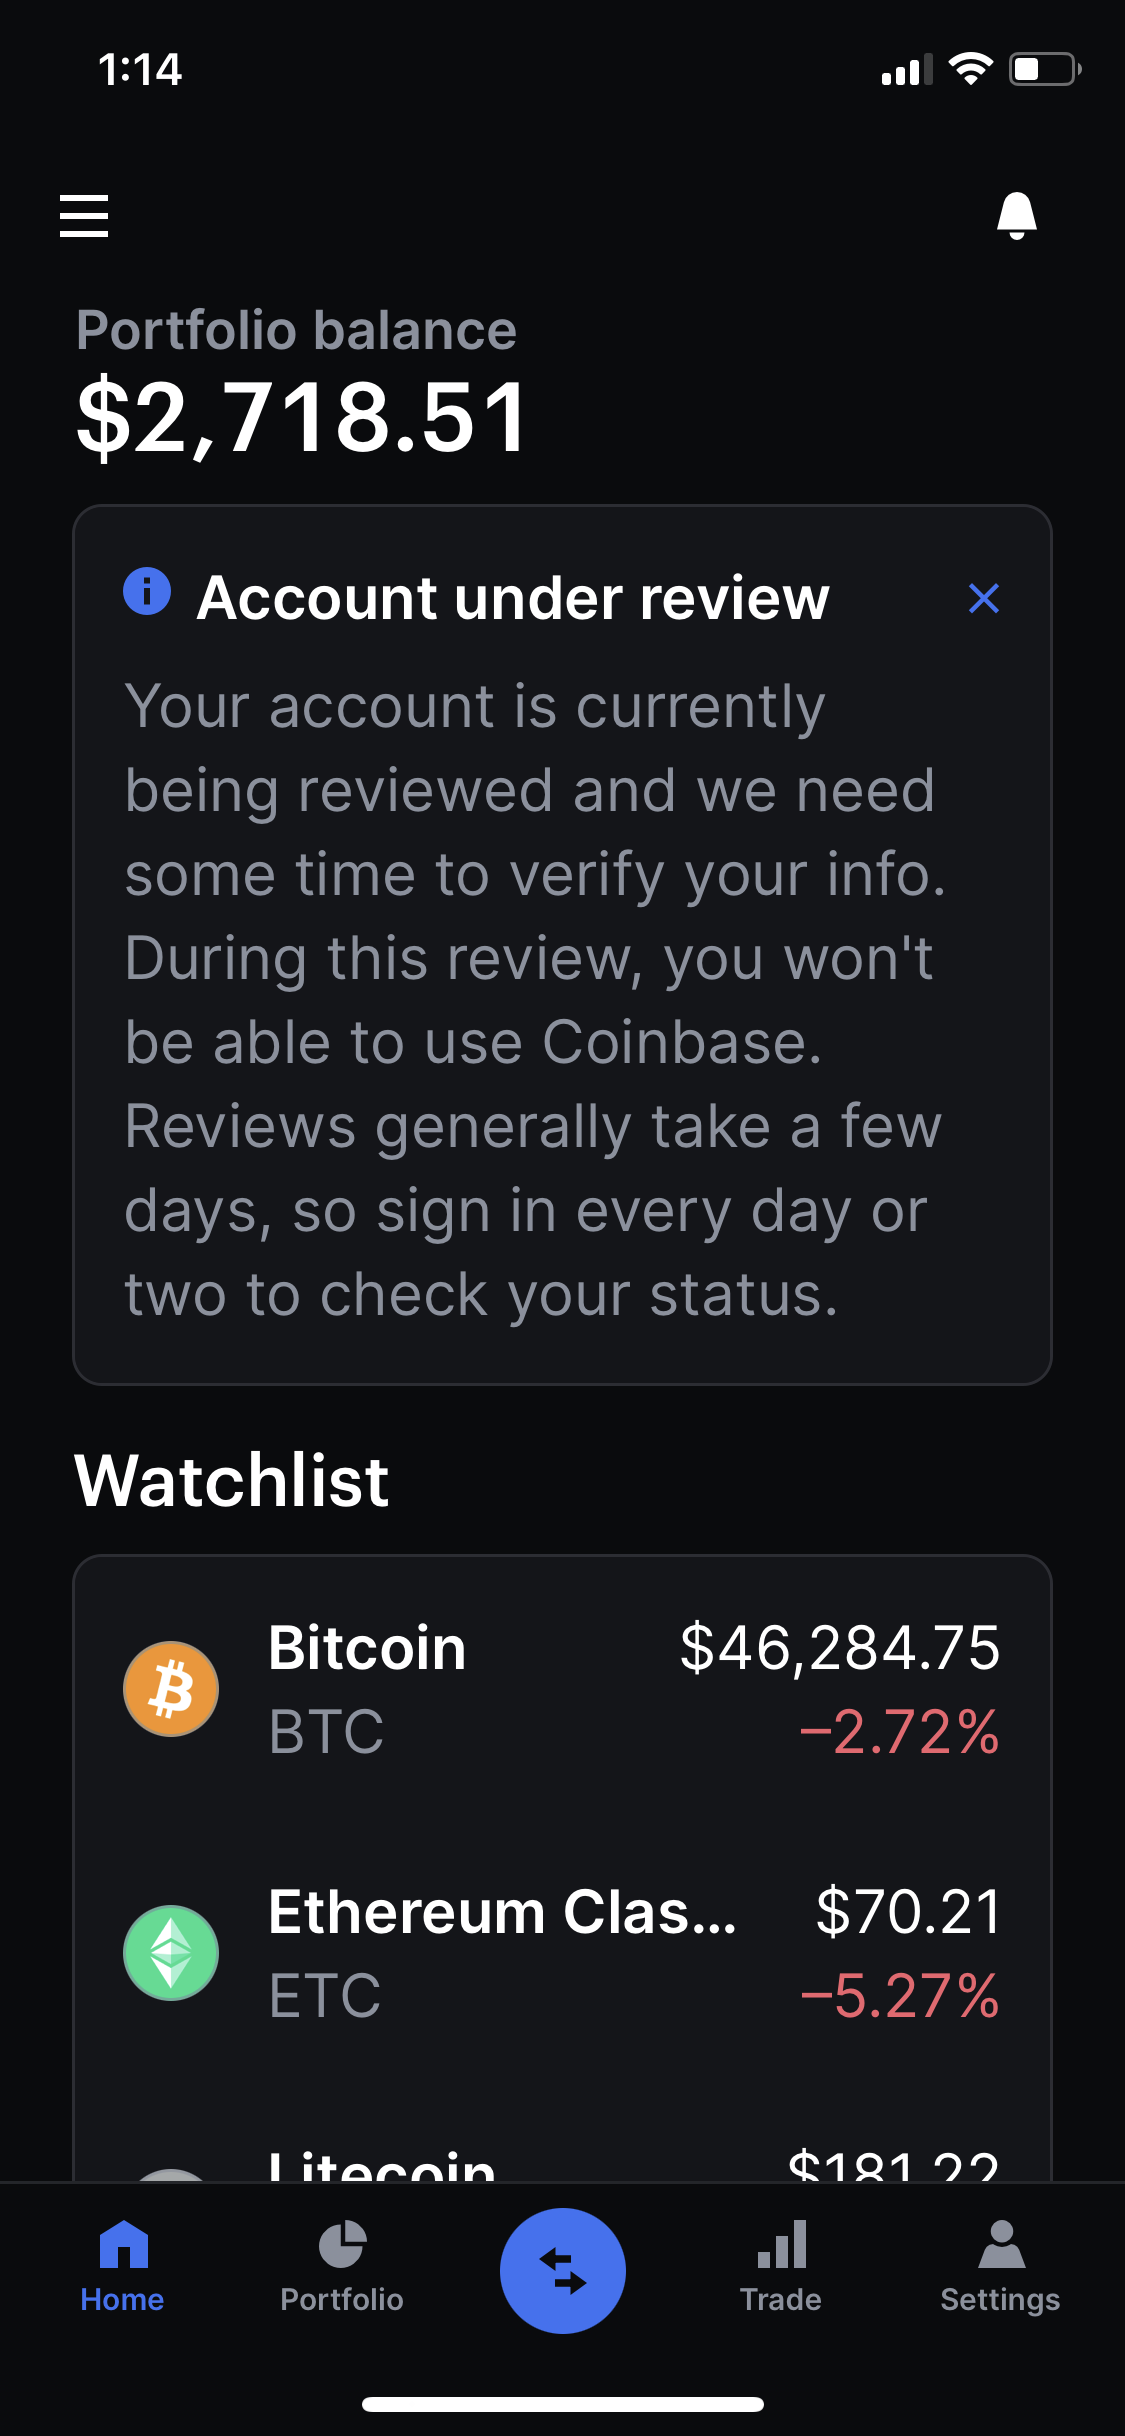 Coinbase complaint Unable to use account for tradingwithdrawals